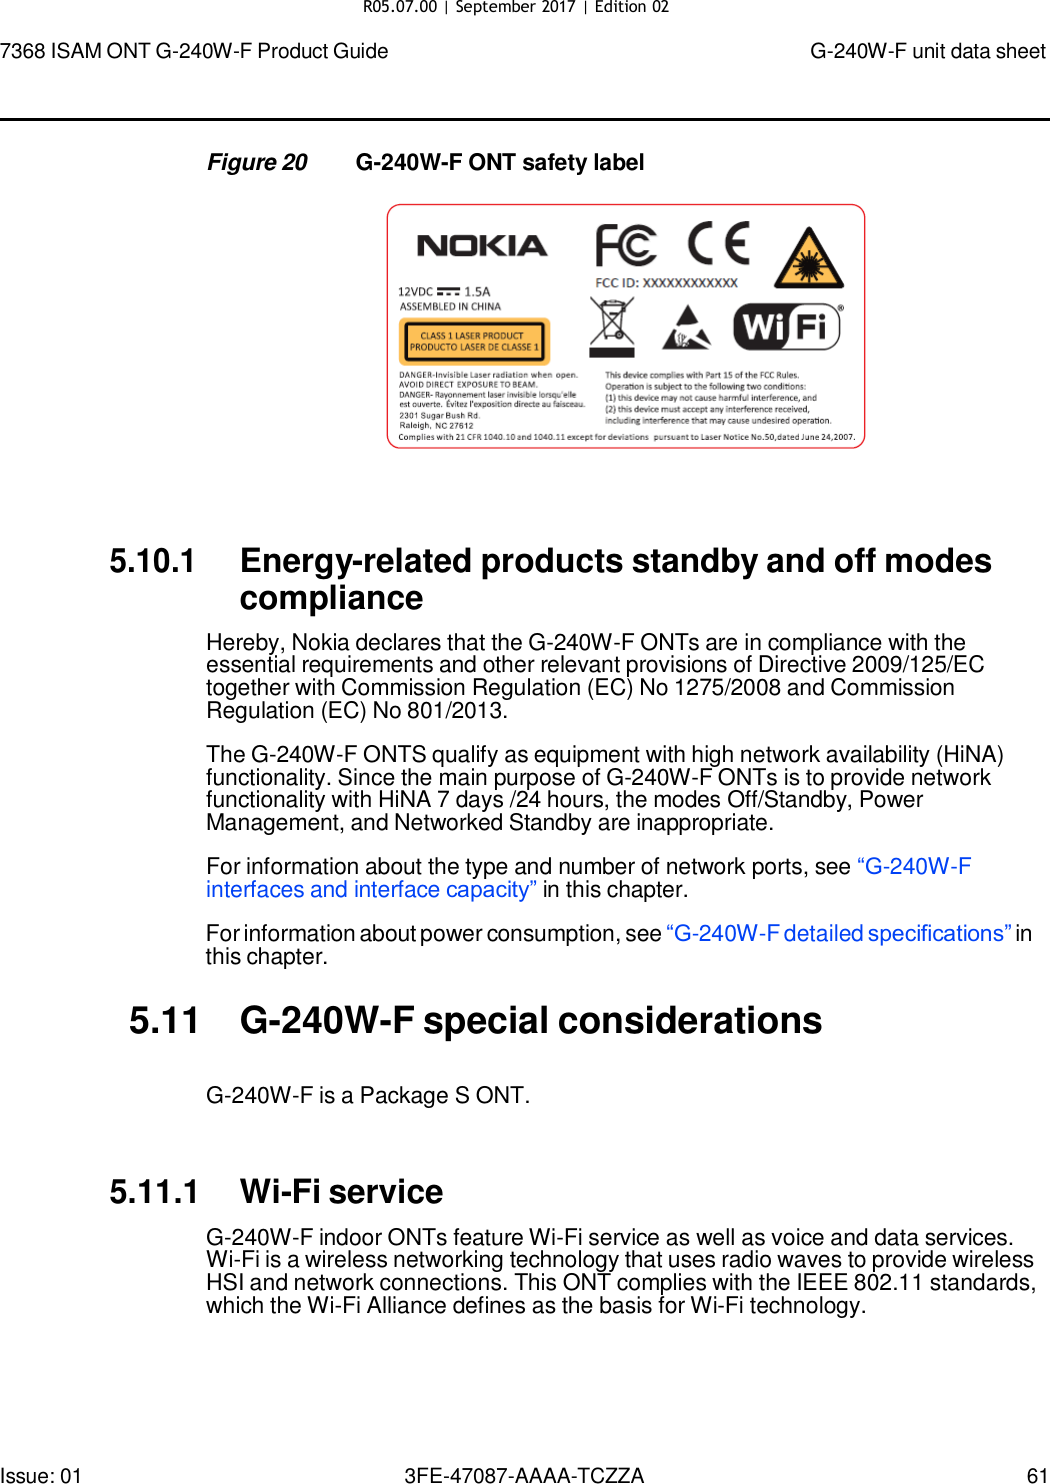 Page 58 of Nokia Bell G240WFV2 7368 ISAM GPON ONU User Manual 7368 ISAM ONT G 240W F Product Guide